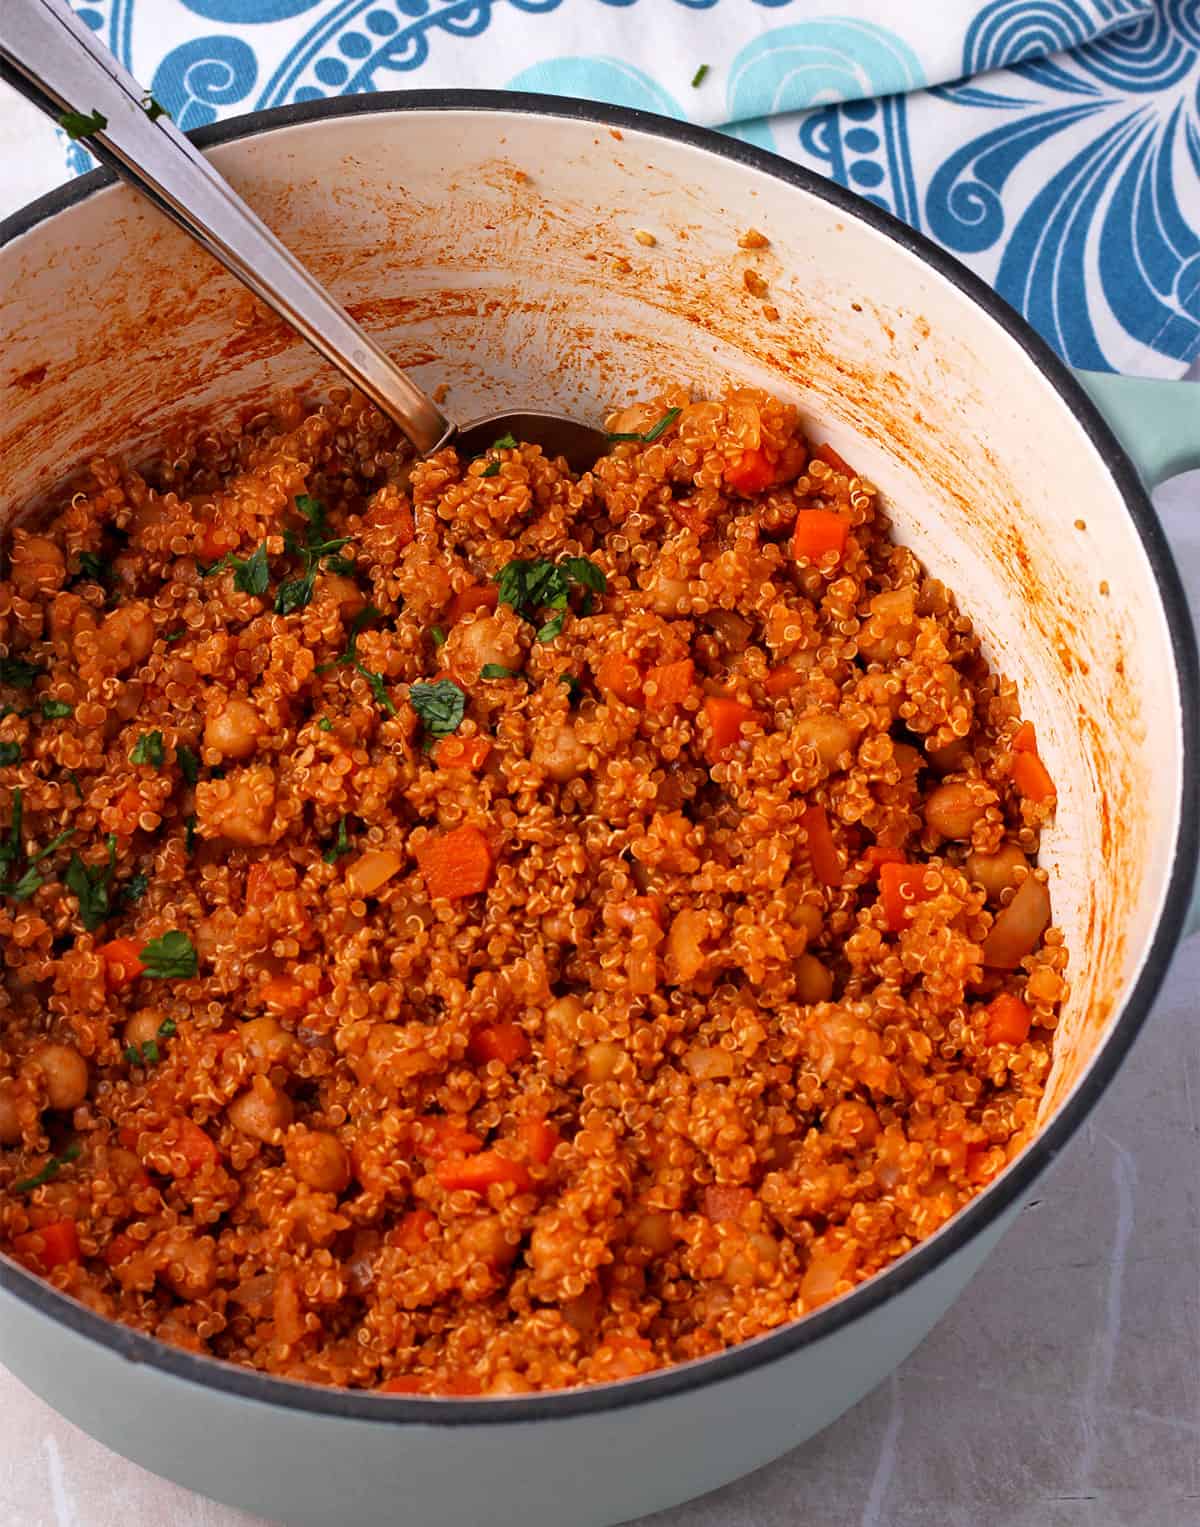 Quinoa pilaf with carrots and chickpeas in a pot with chopped parsley.